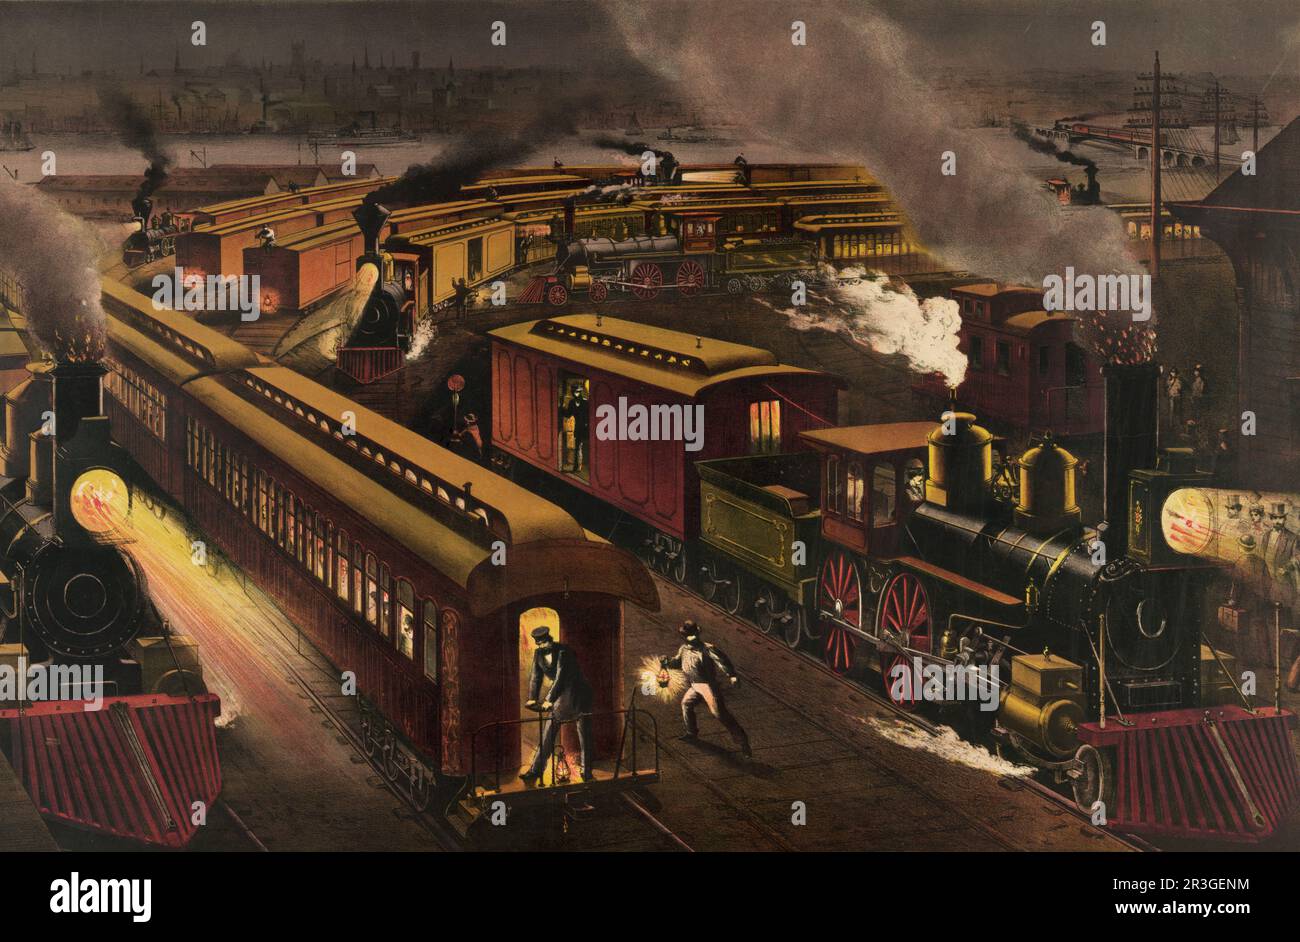 Vintage 19th century illustration of several passenger and freight trains at a train station during the night. Stock Photo